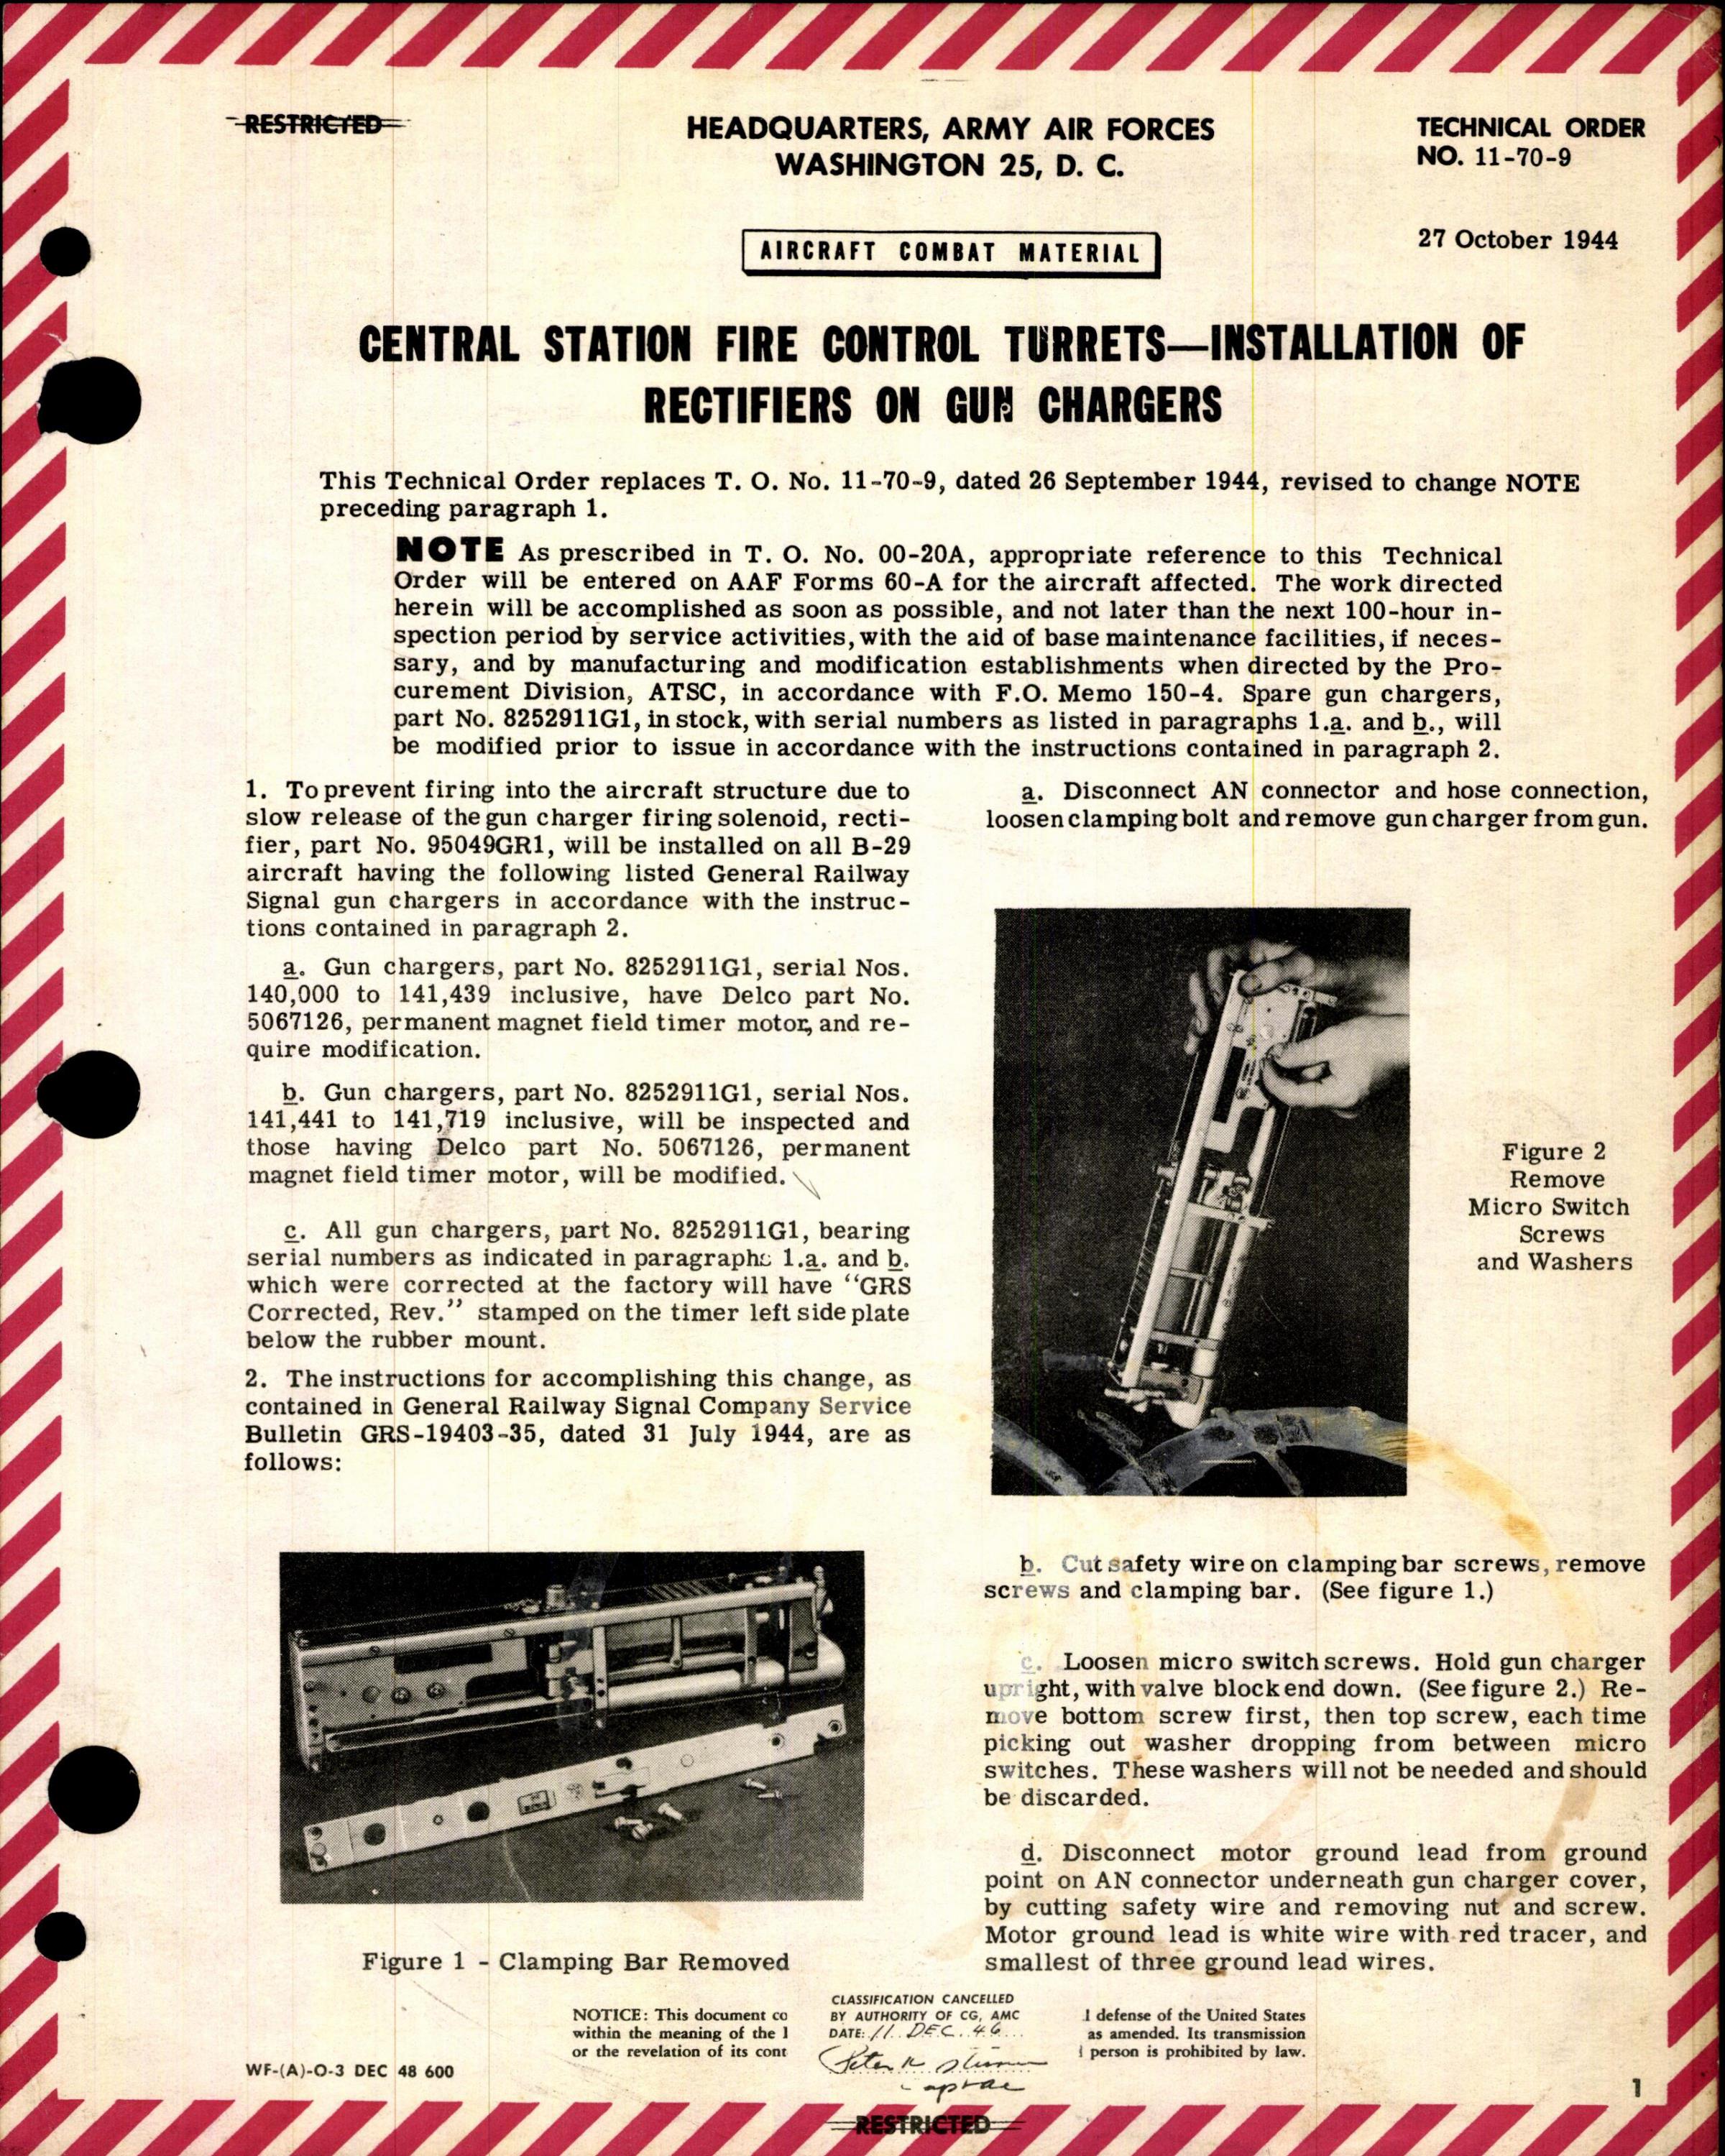 Sample page 1 from AirCorps Library document: Installation of Rectifiers on Gun Chargers